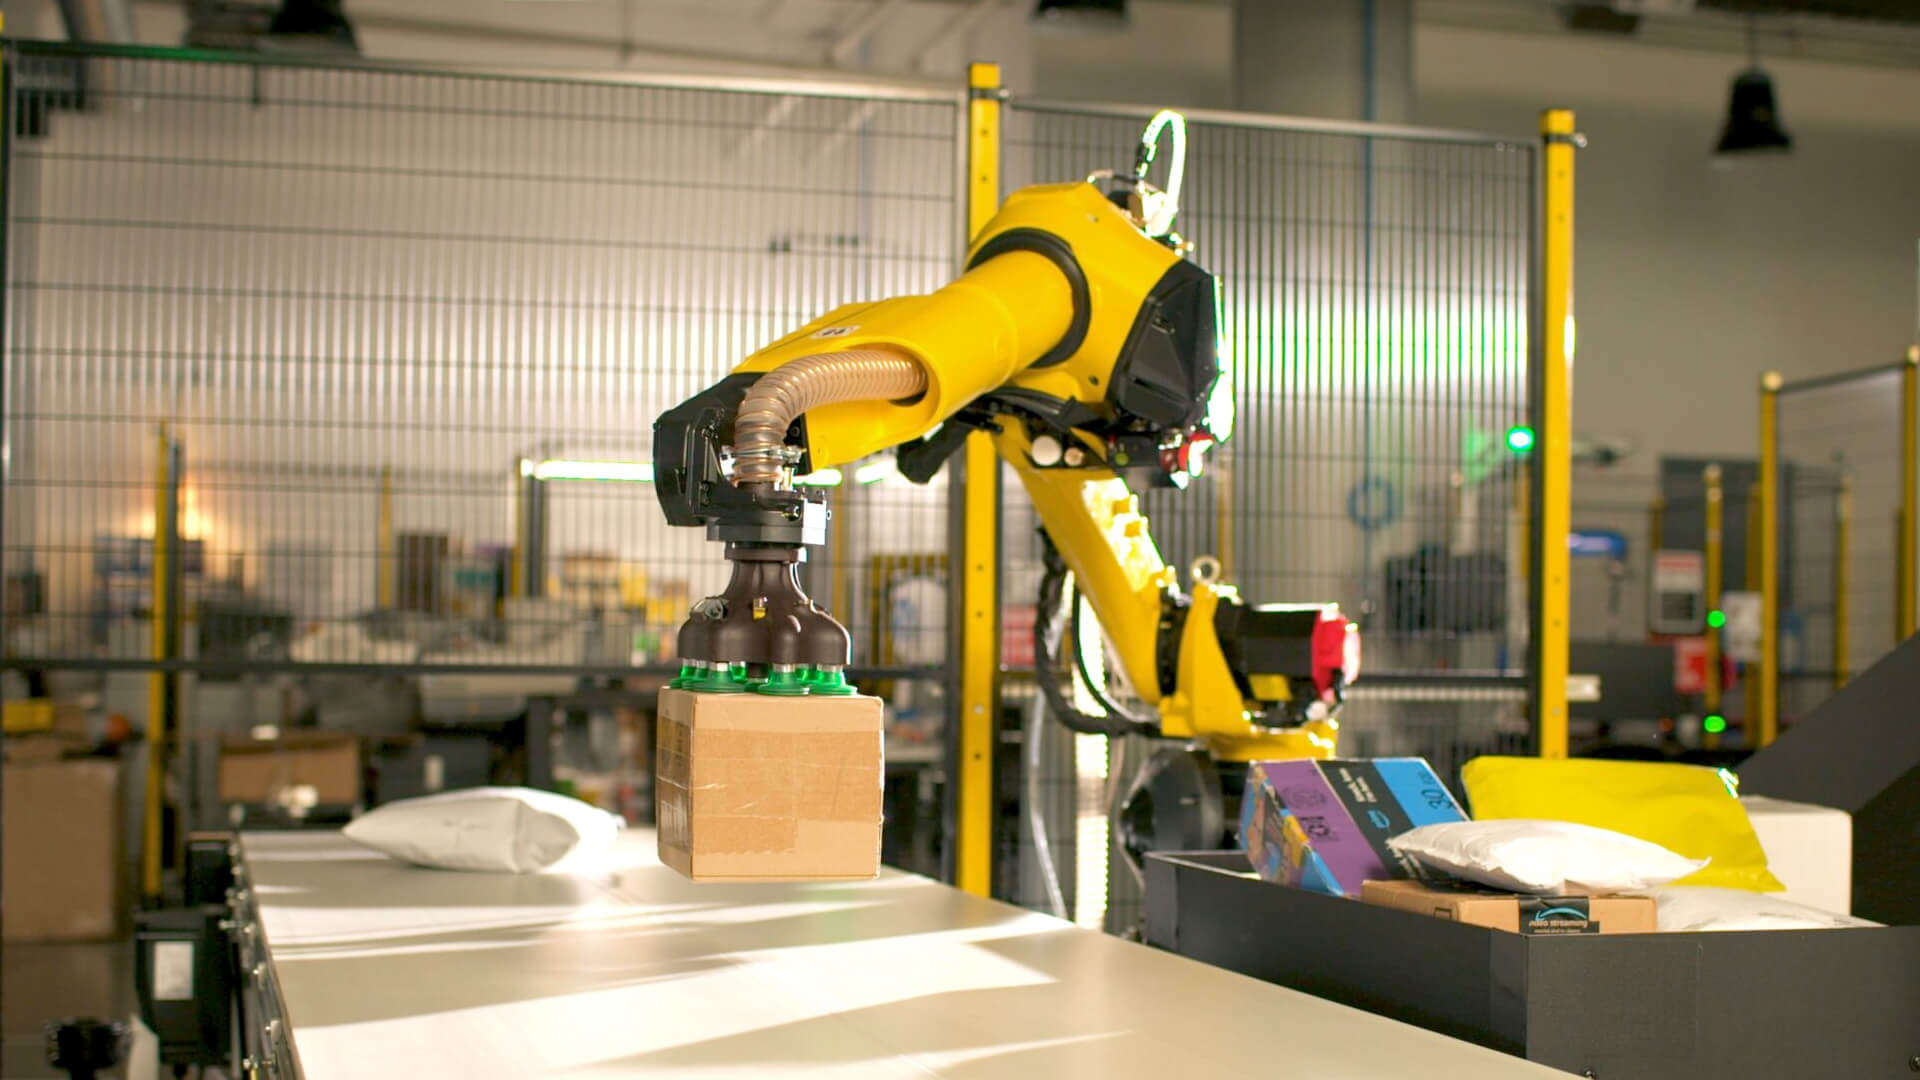 OSARO offers robotic systems for bagging, induction, and piece picking. 